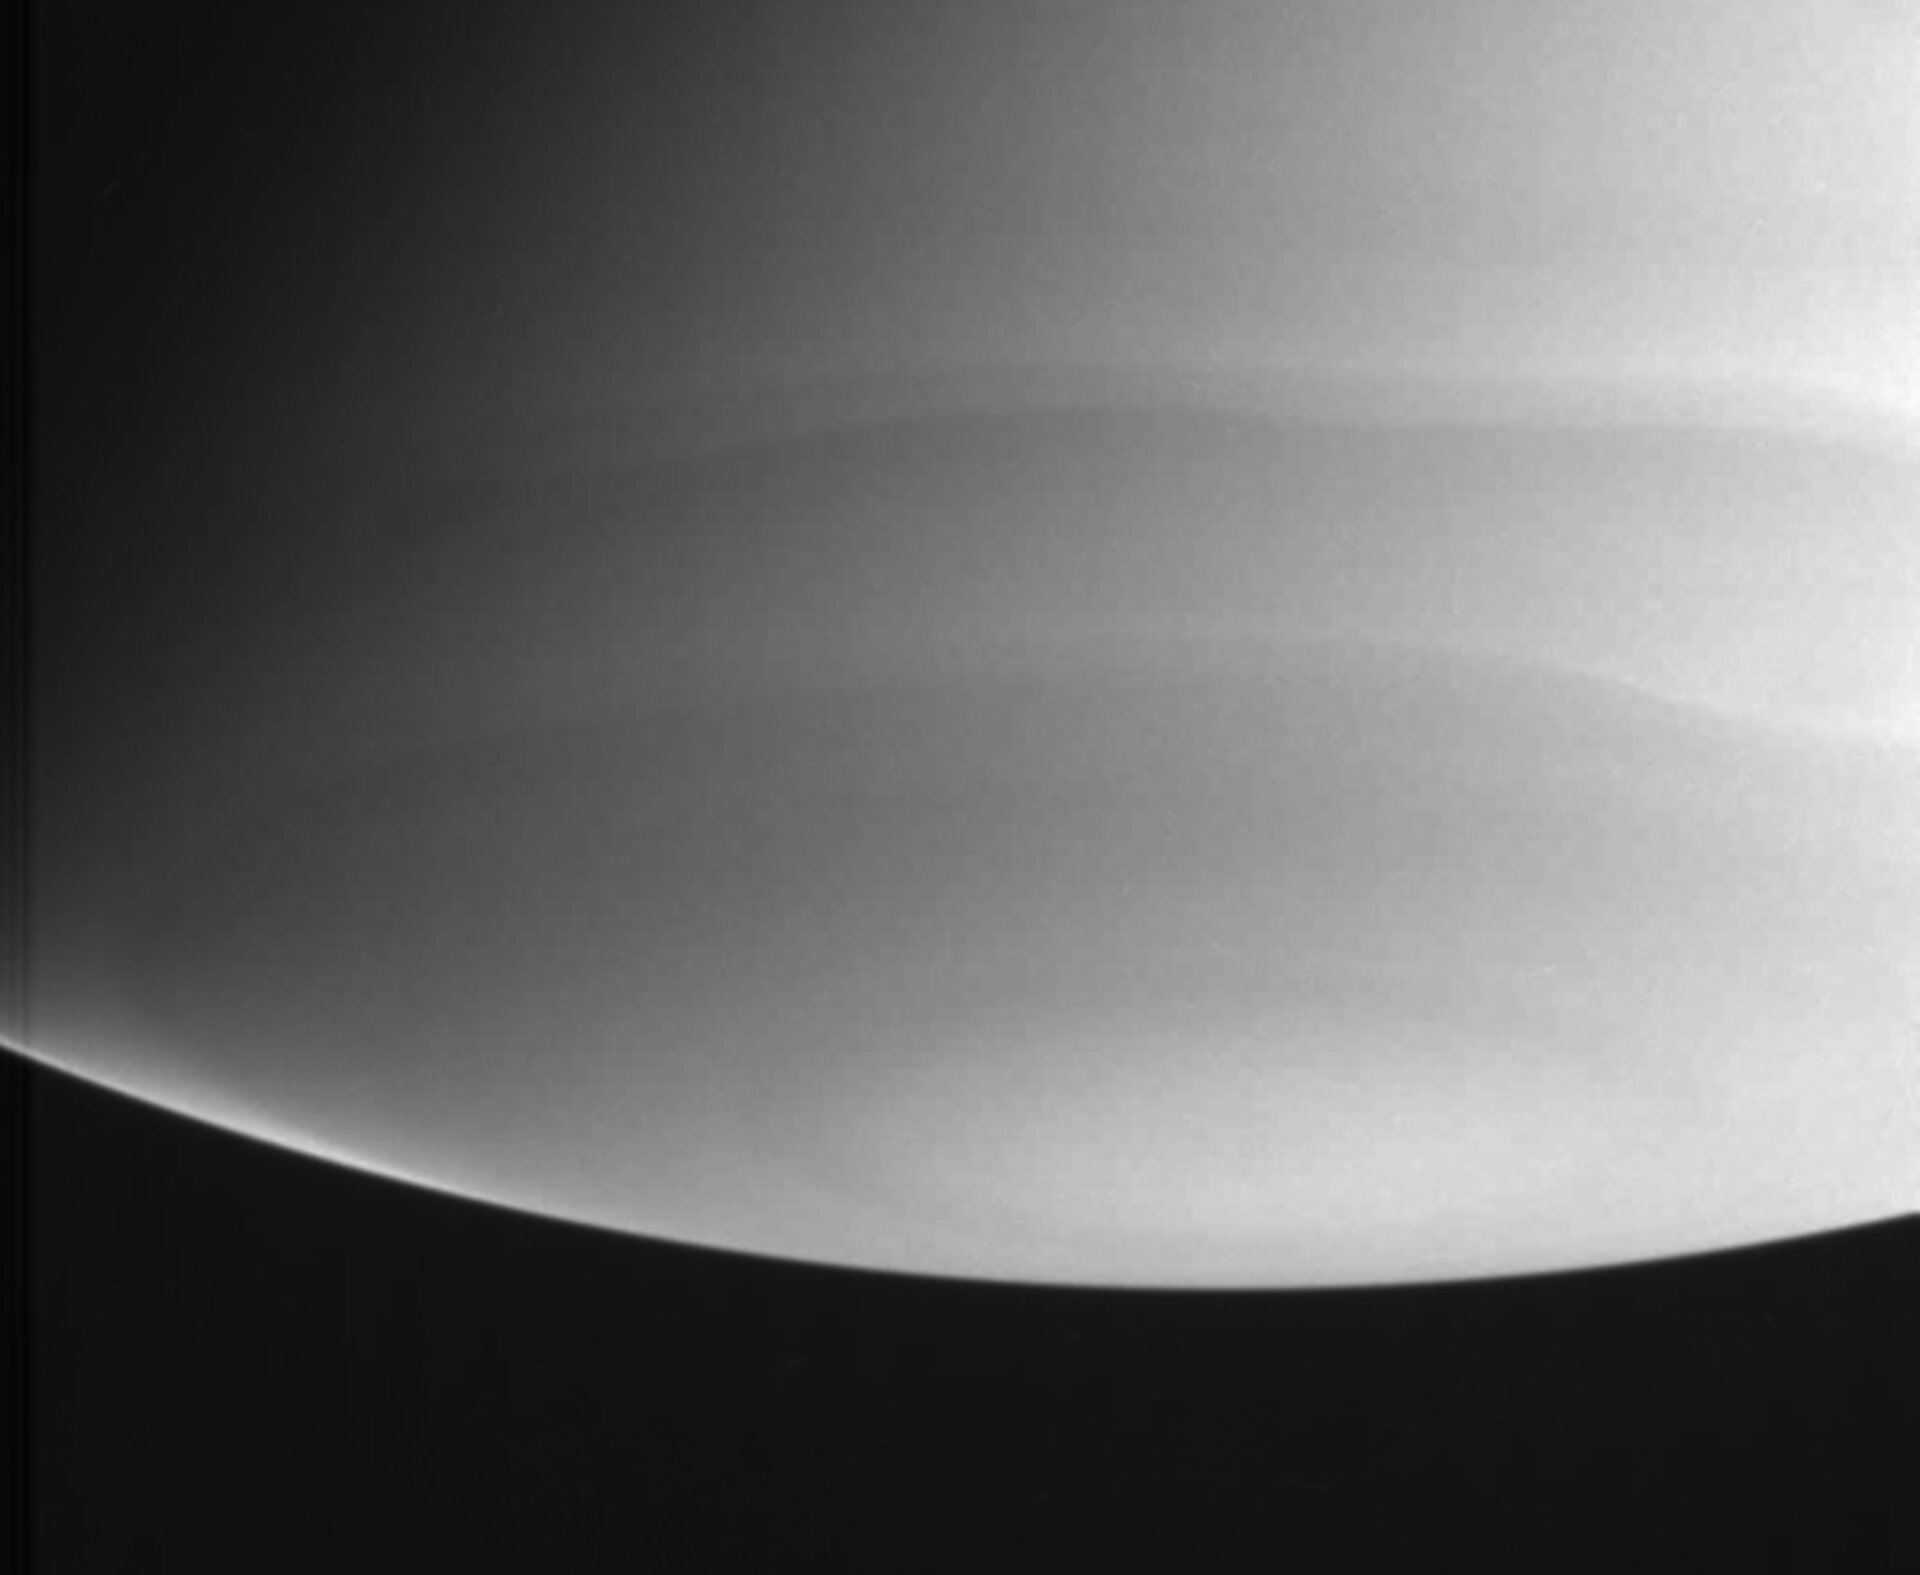 Ultraviolet view of Saturn's south pole